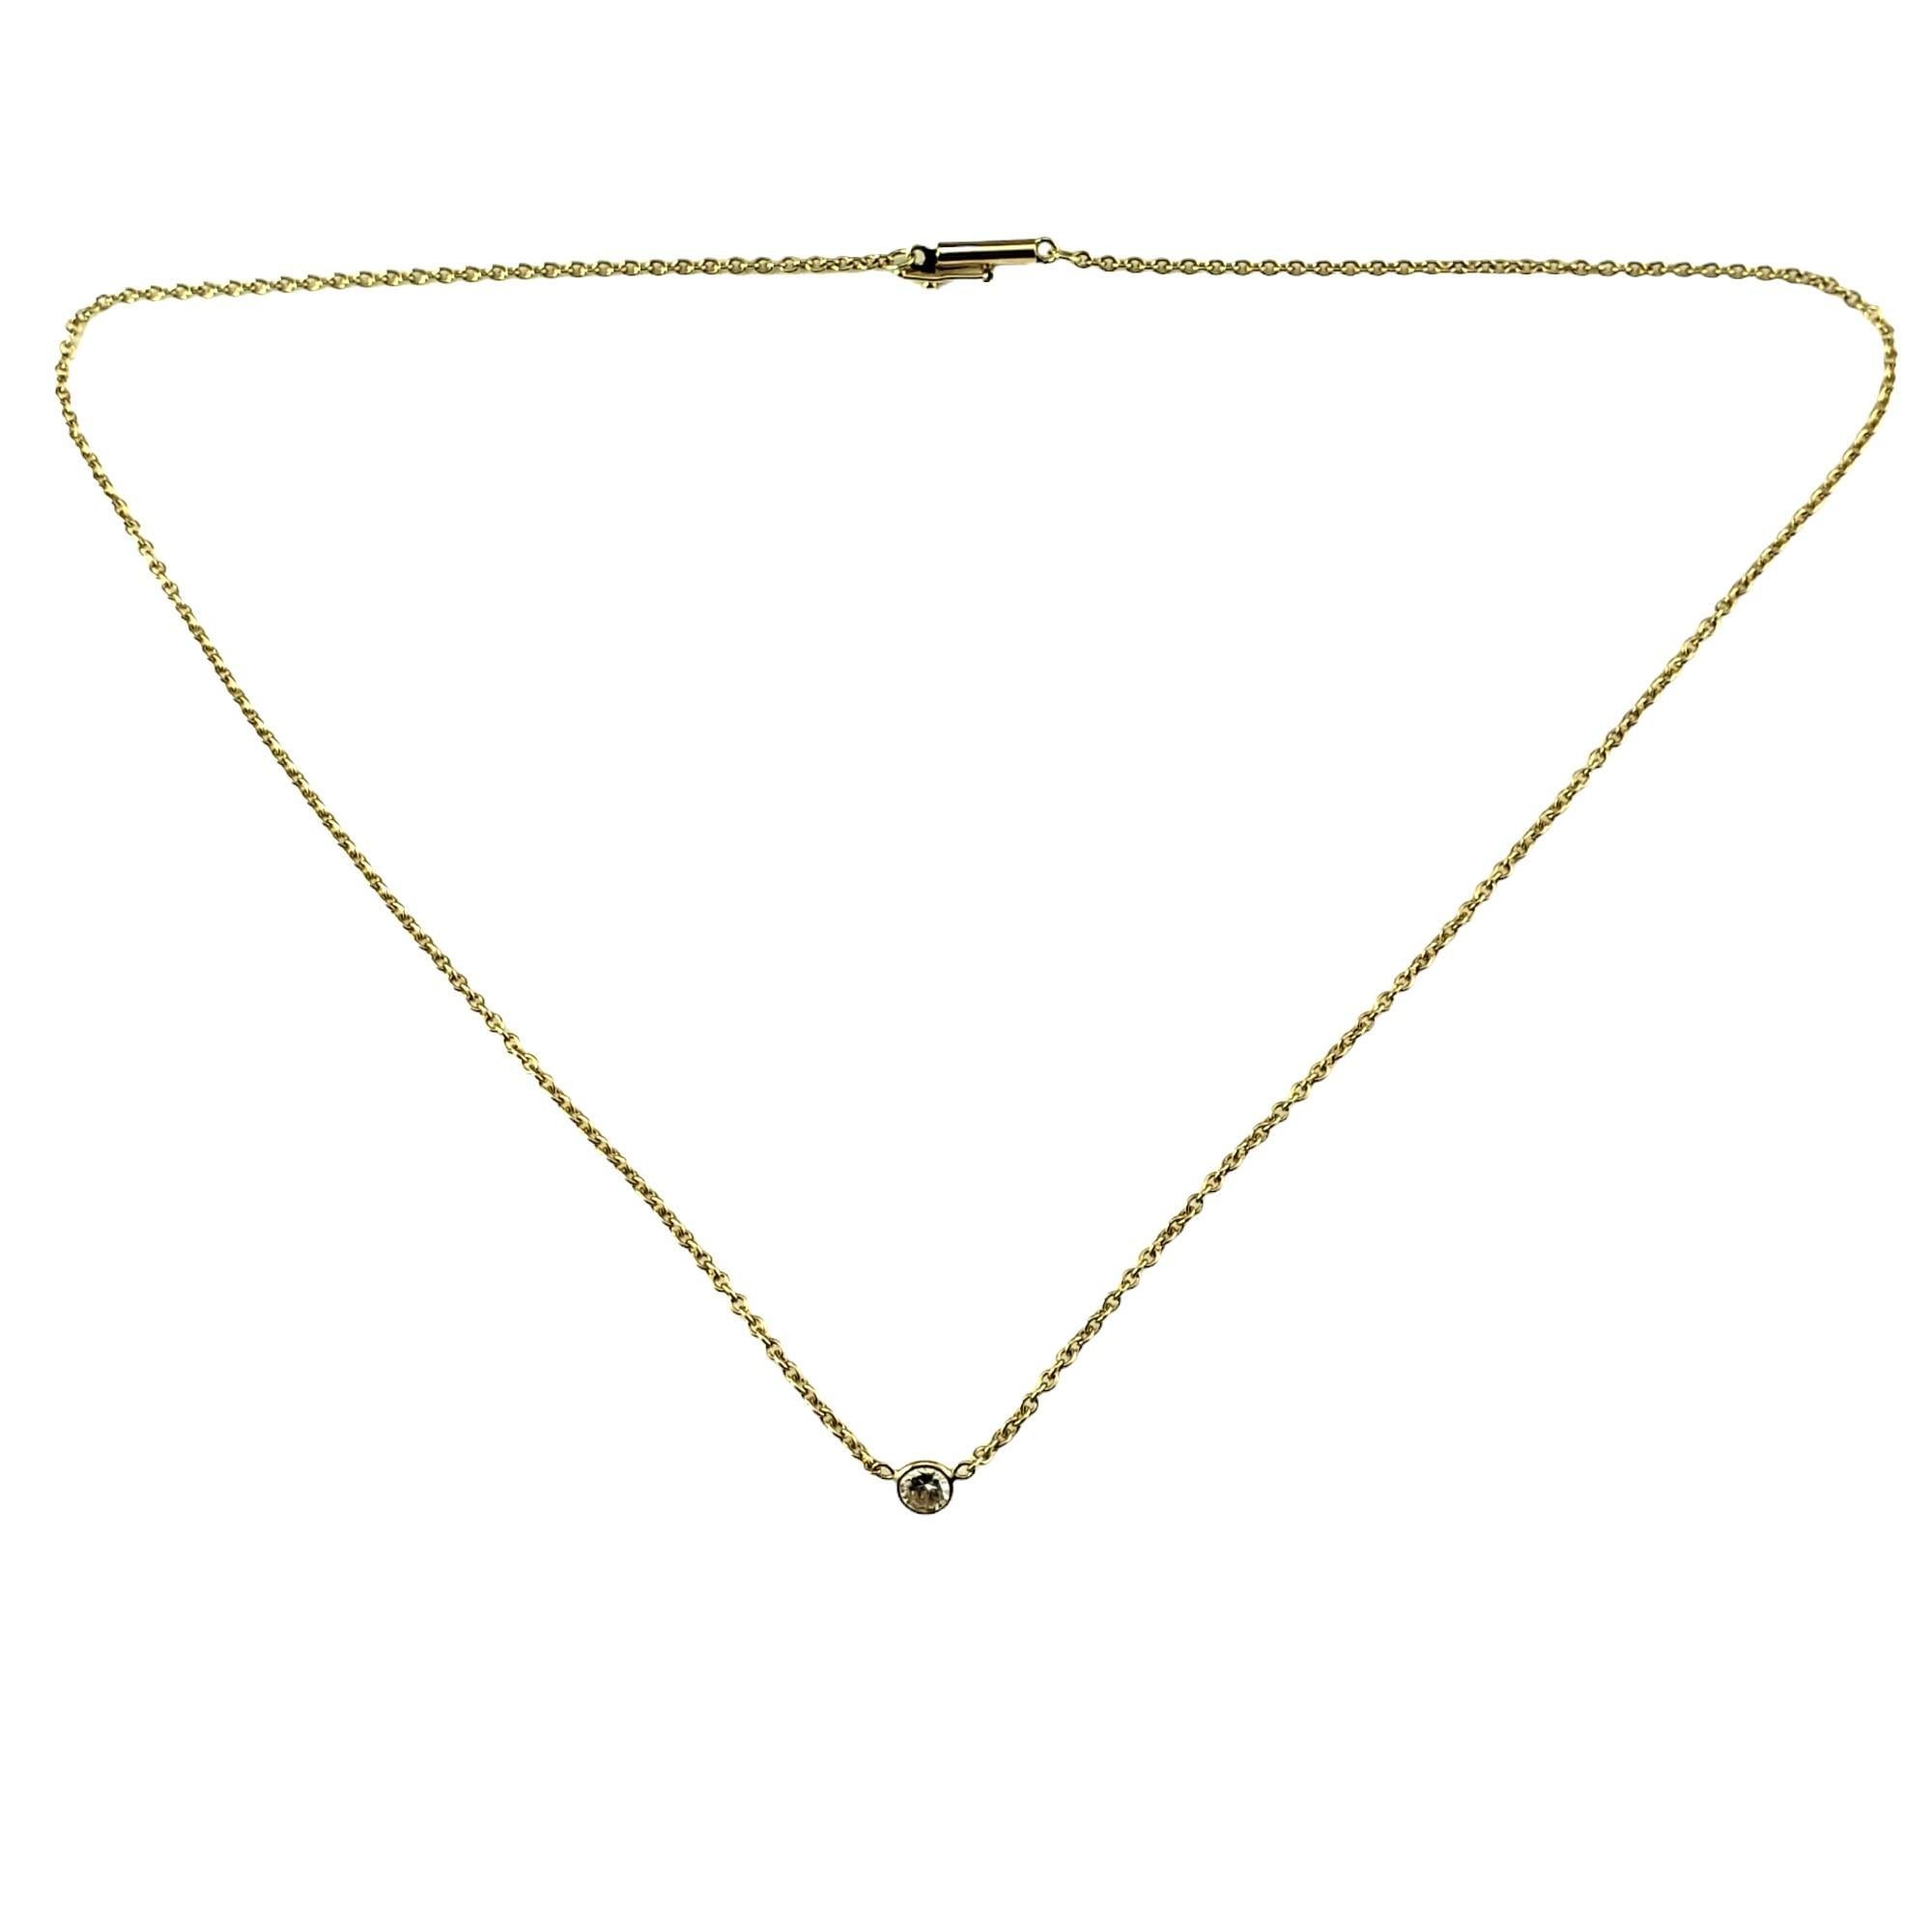 Vintage 14K Yellow Gold Diamond Solitaire Necklace-

This sparkling necklace features one round brilliant cut diamond bezel set on a classic 14K yellow gold necklace.

Approximate total diamond weight: .25 ct.

Diamond color: I

Diamond clarity: